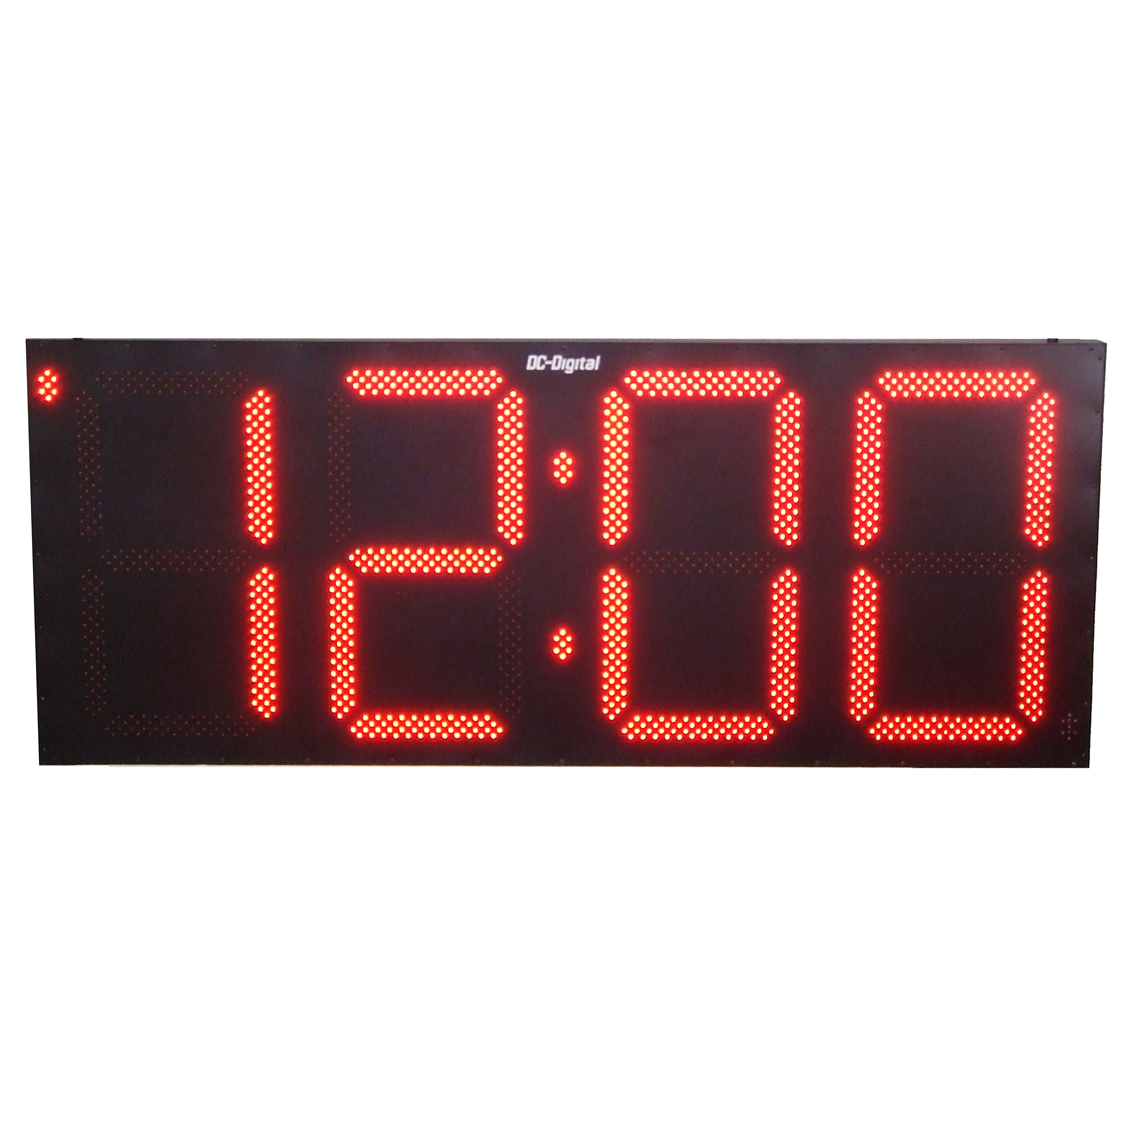 (DC-300N-IN) "Biggest Indoor Network Clock in the Industry" Network NTP Synchronized LED Digital Clock, 30 Inch high Digits, 1500 feet viewing distance (INDOOR)